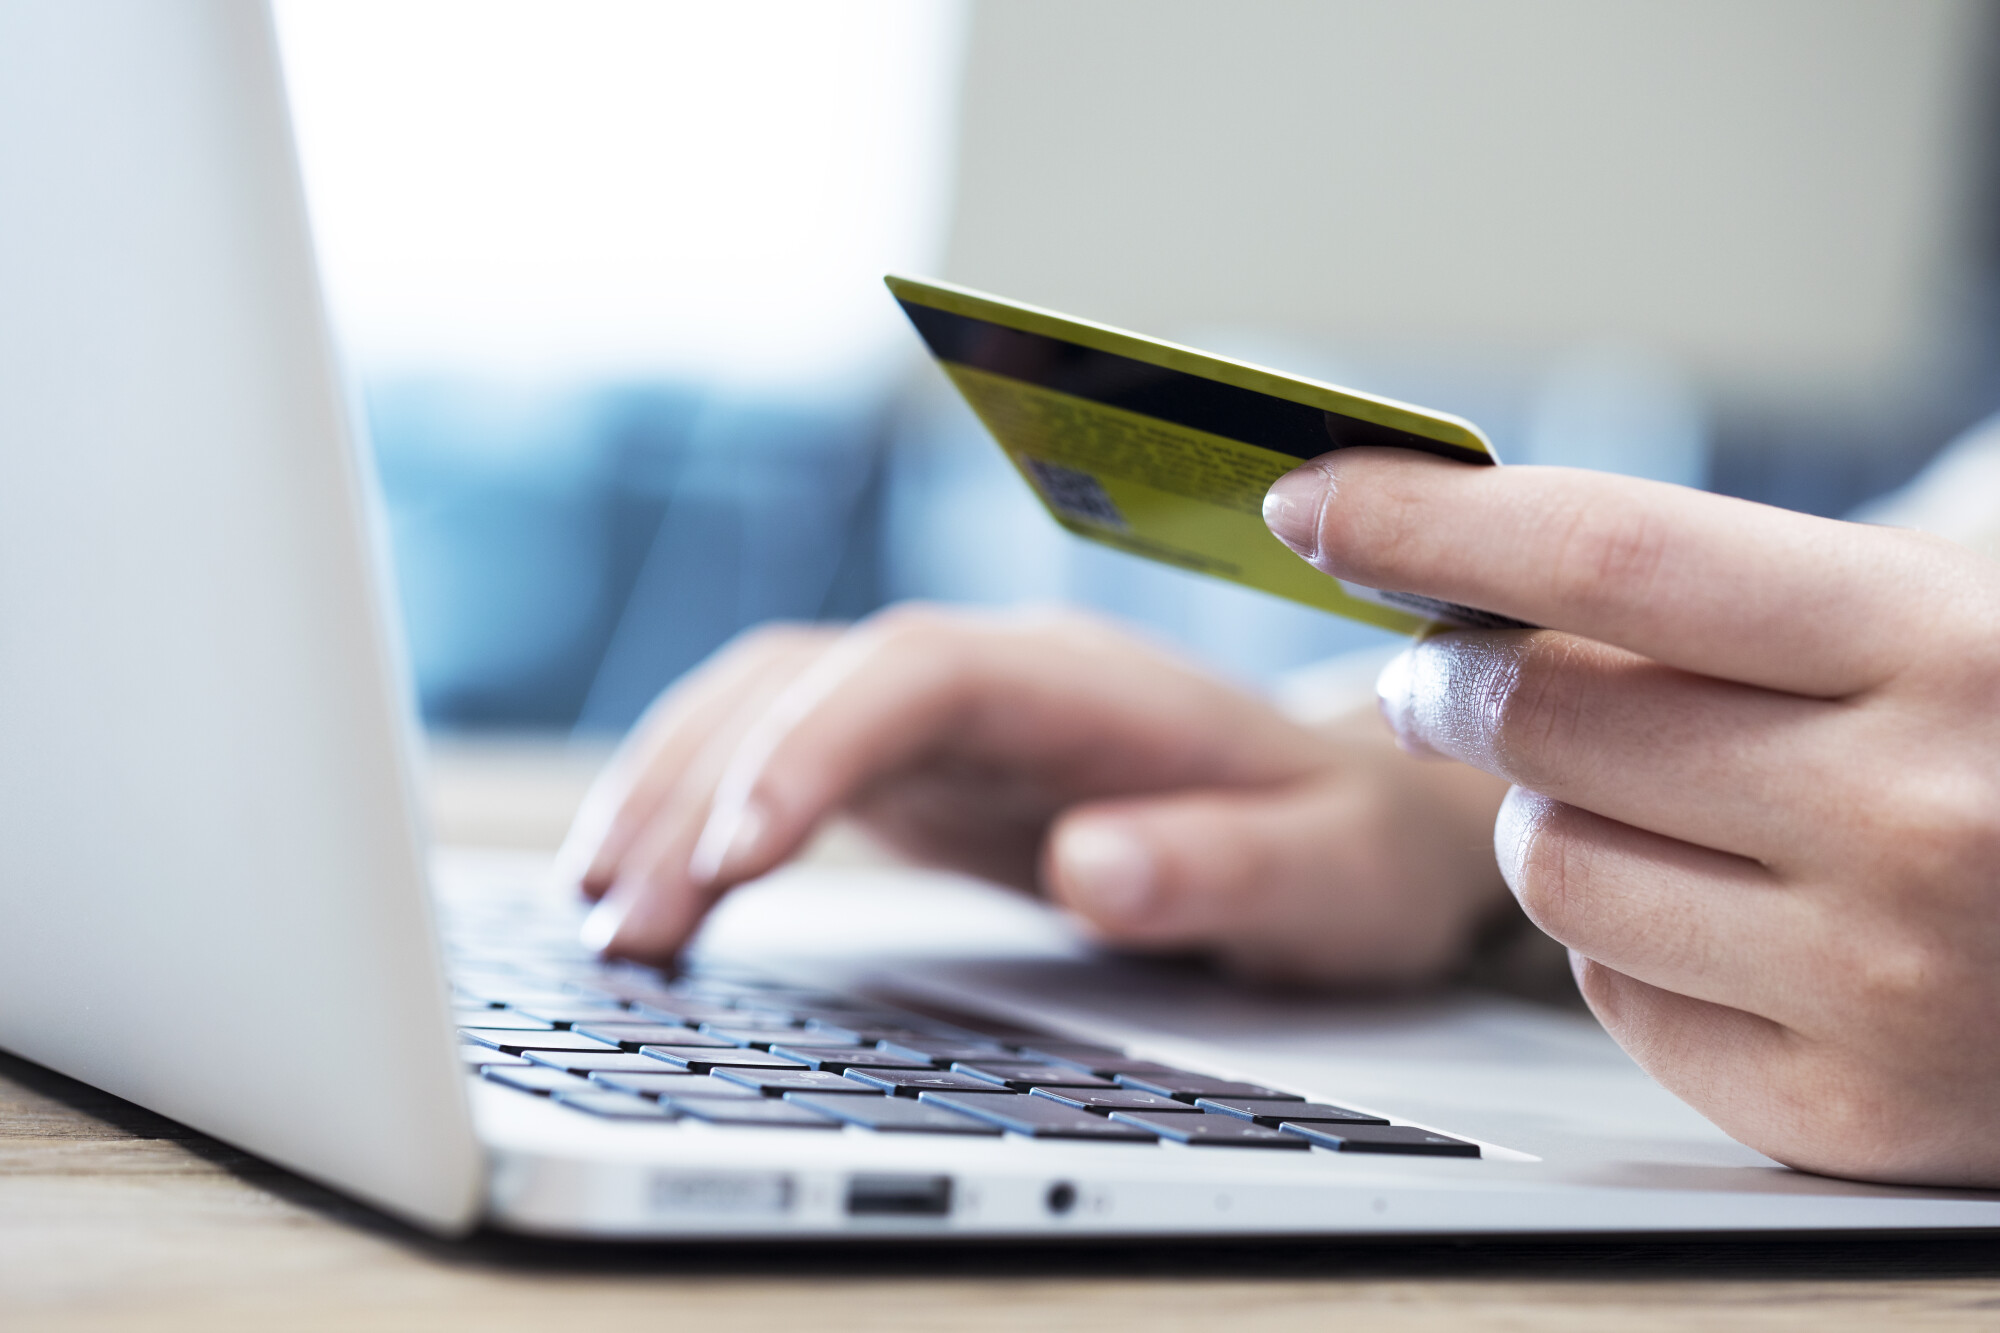 When it comes to choosing a credit card processing company for high risk merchants, click here to explore important factors to consider.